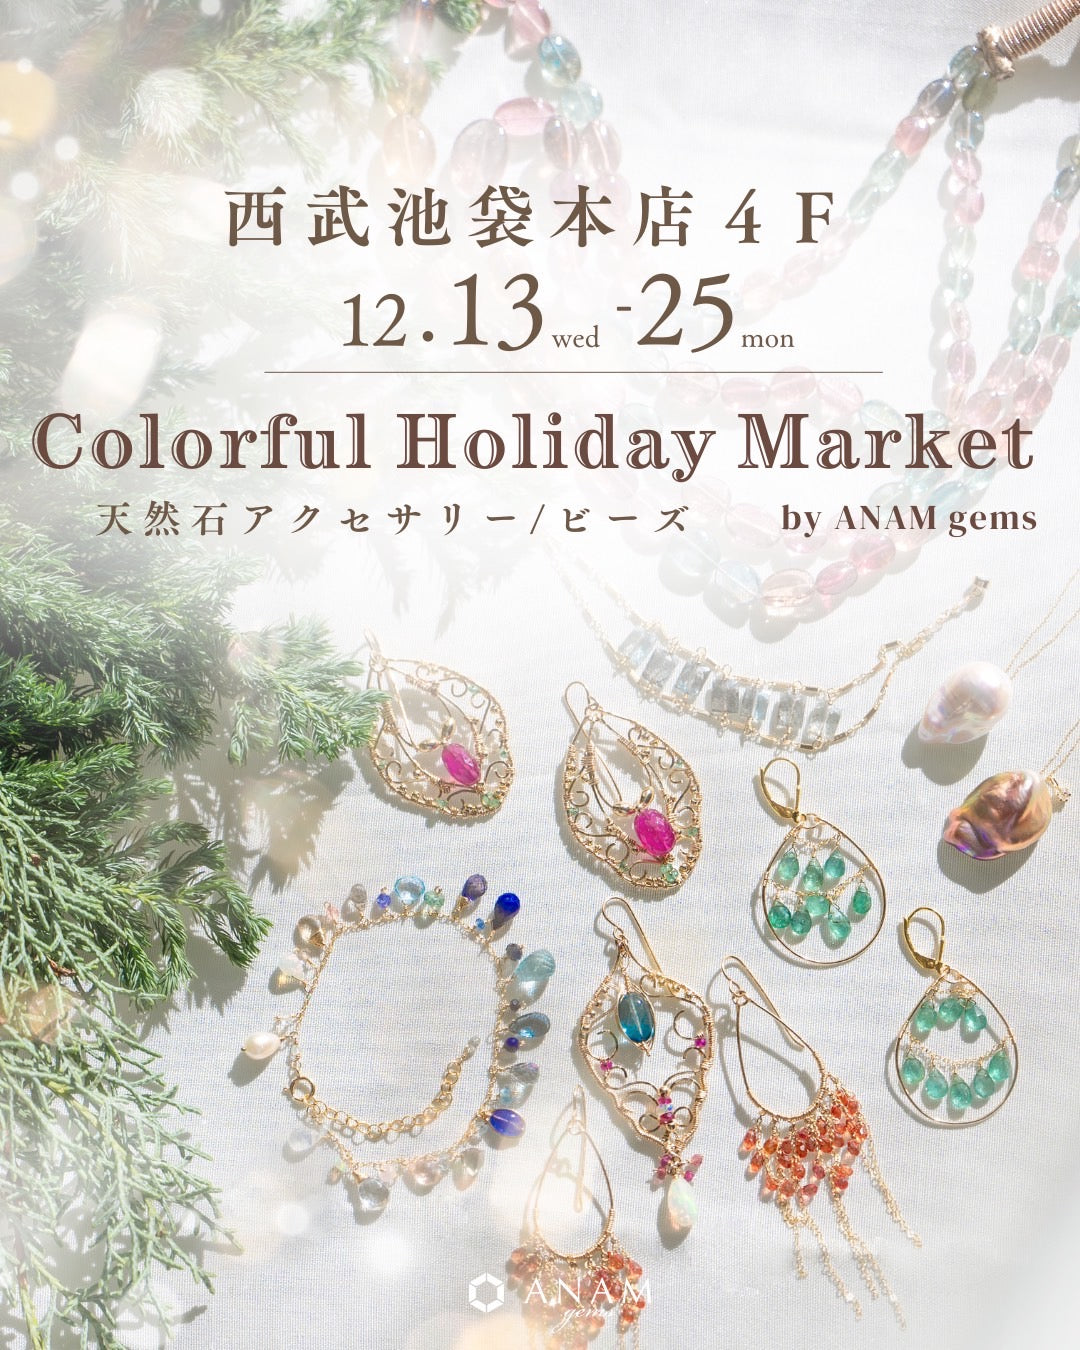 Colorful Holiday Market by ANAM gems